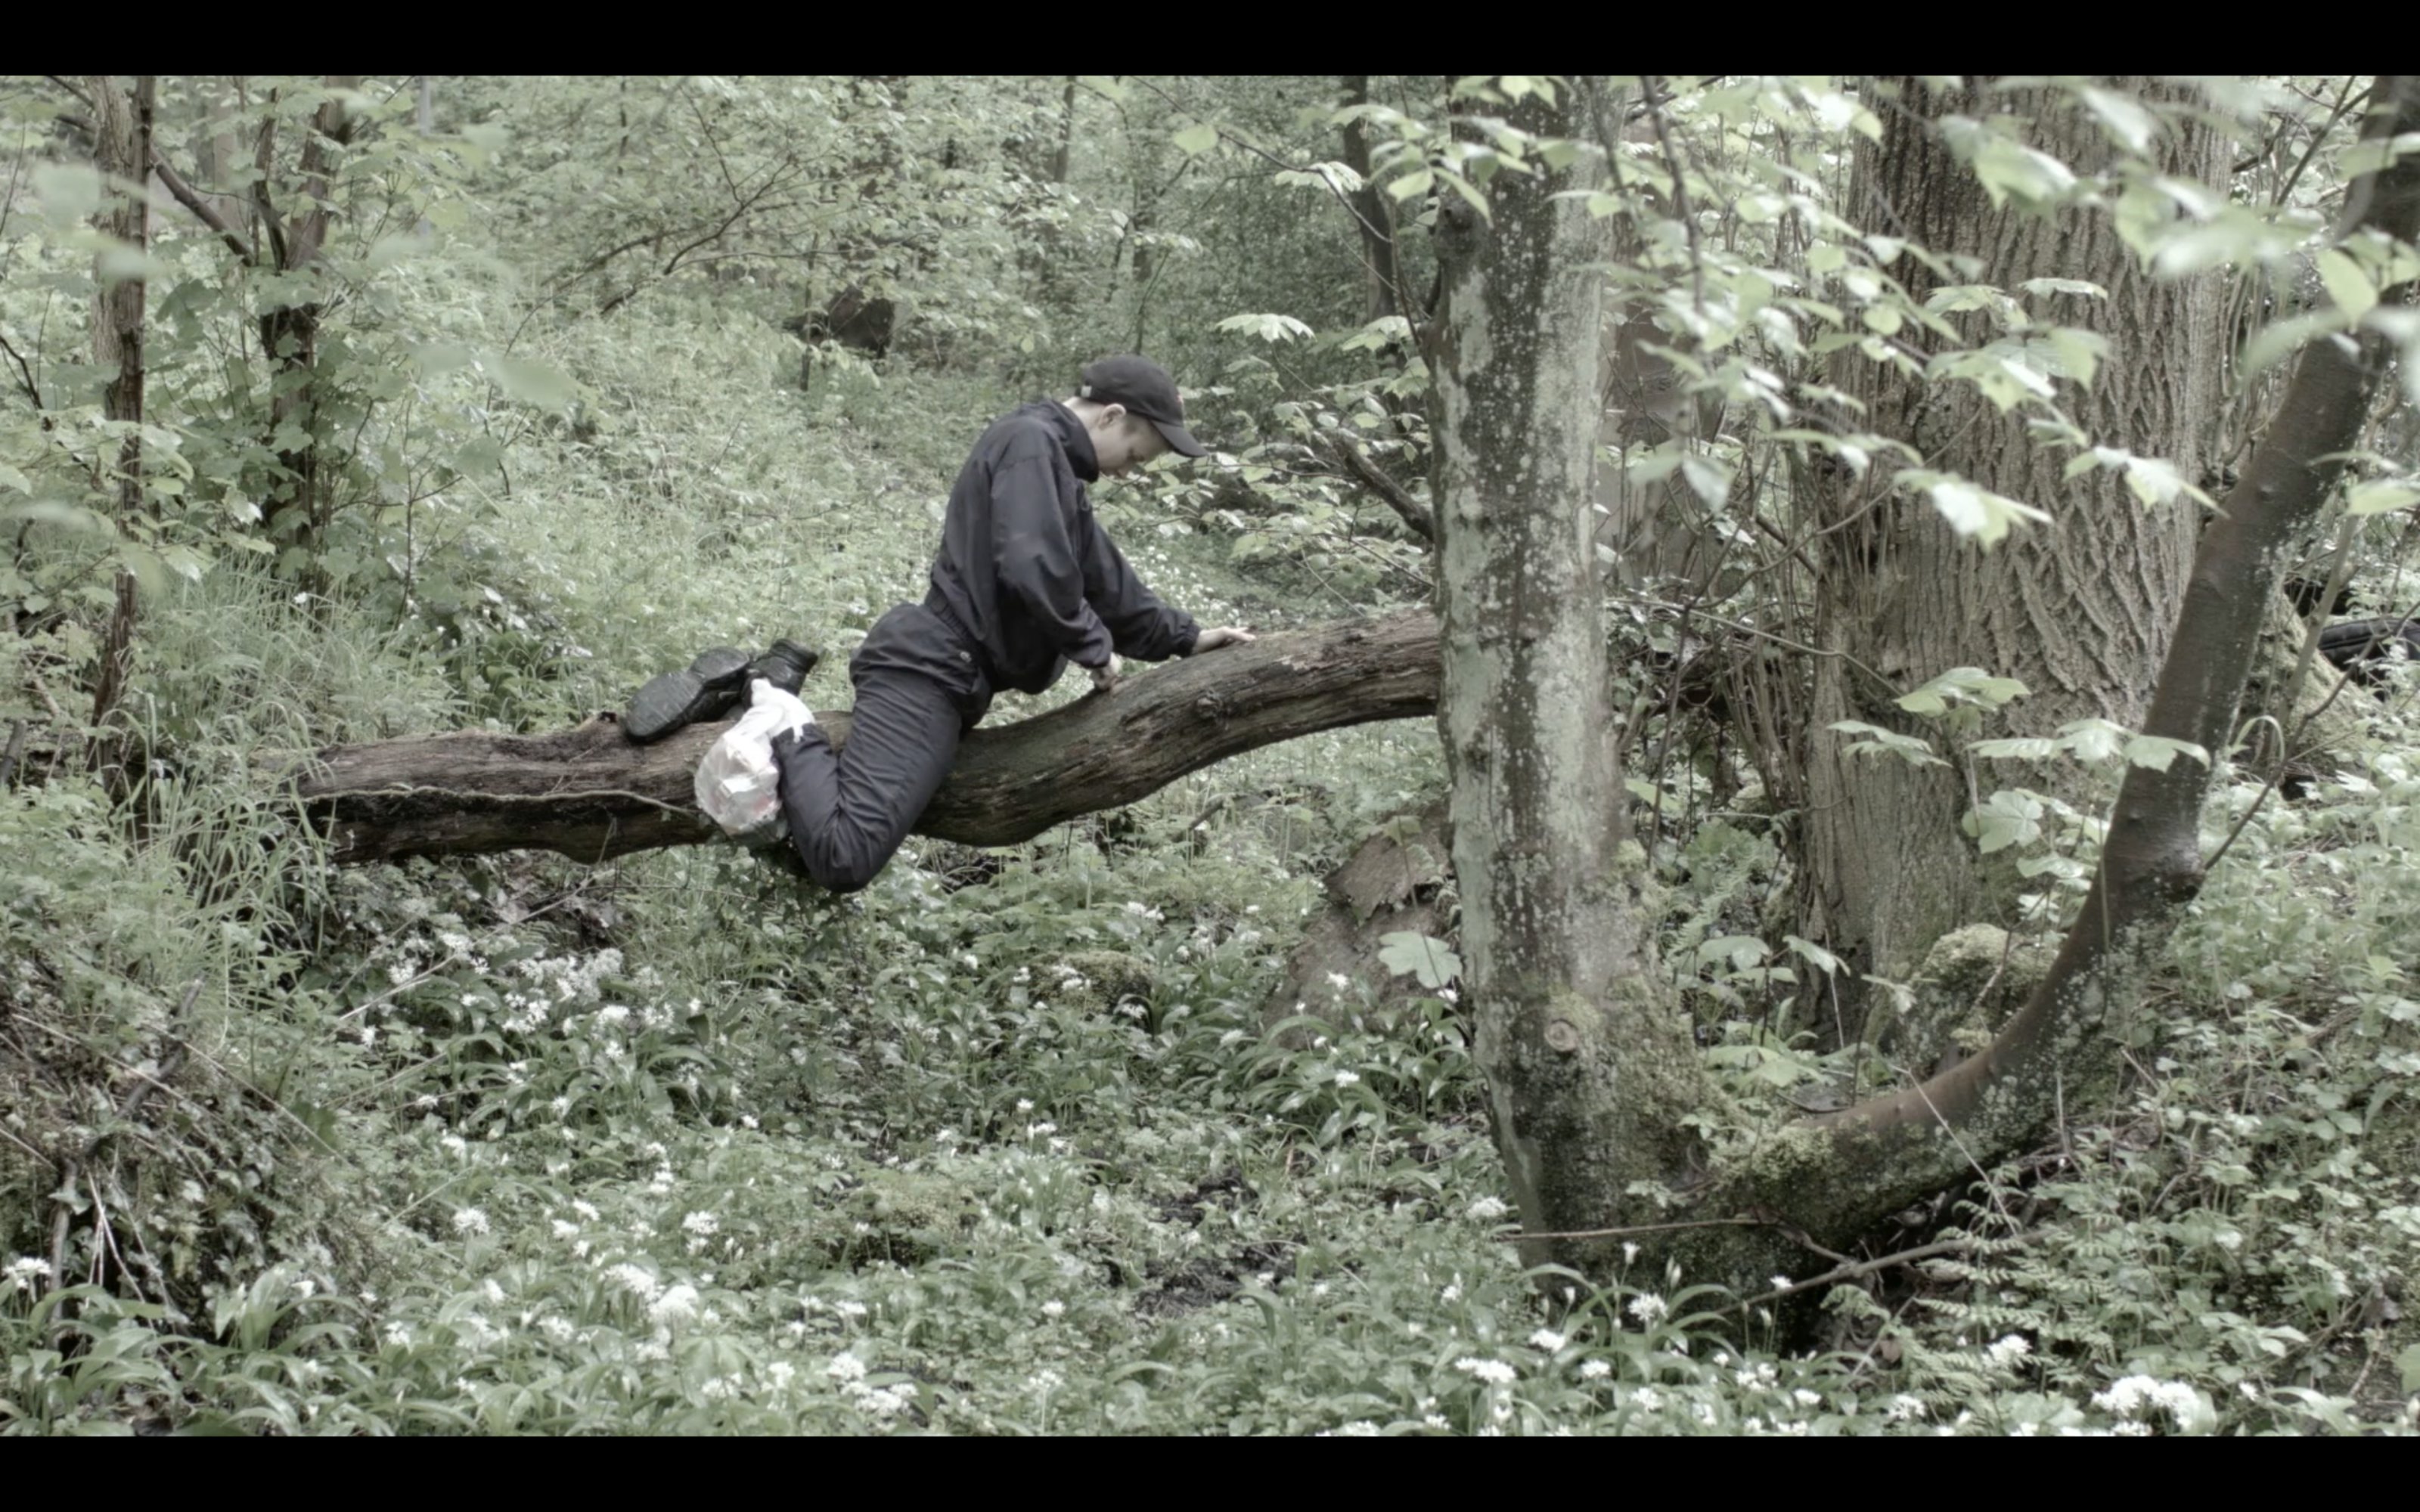 A screenshot fro Roy Claire Potter's film, we see a man sitting on a tree.